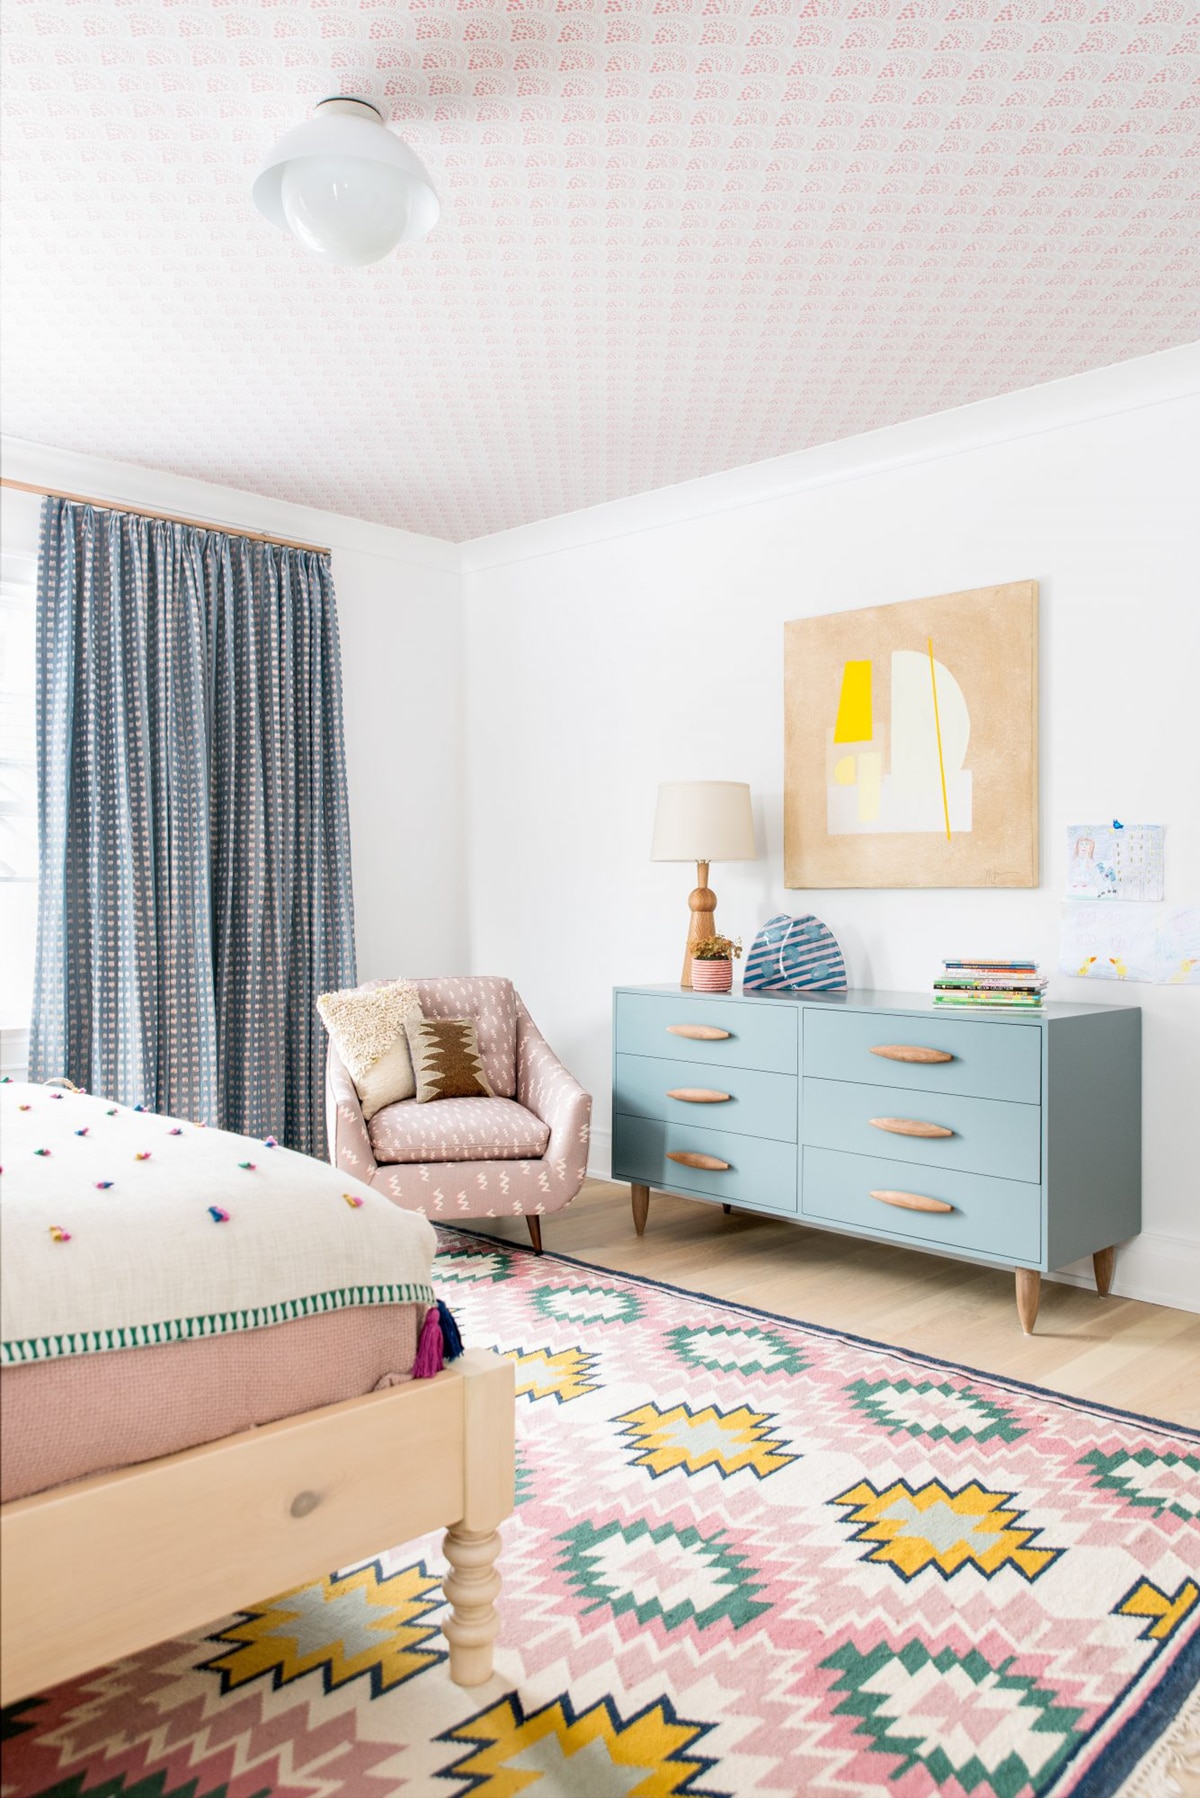 fresh and fun bedroom design in layered pattern and pastels by cortney bishop design | house tour on cocok elley